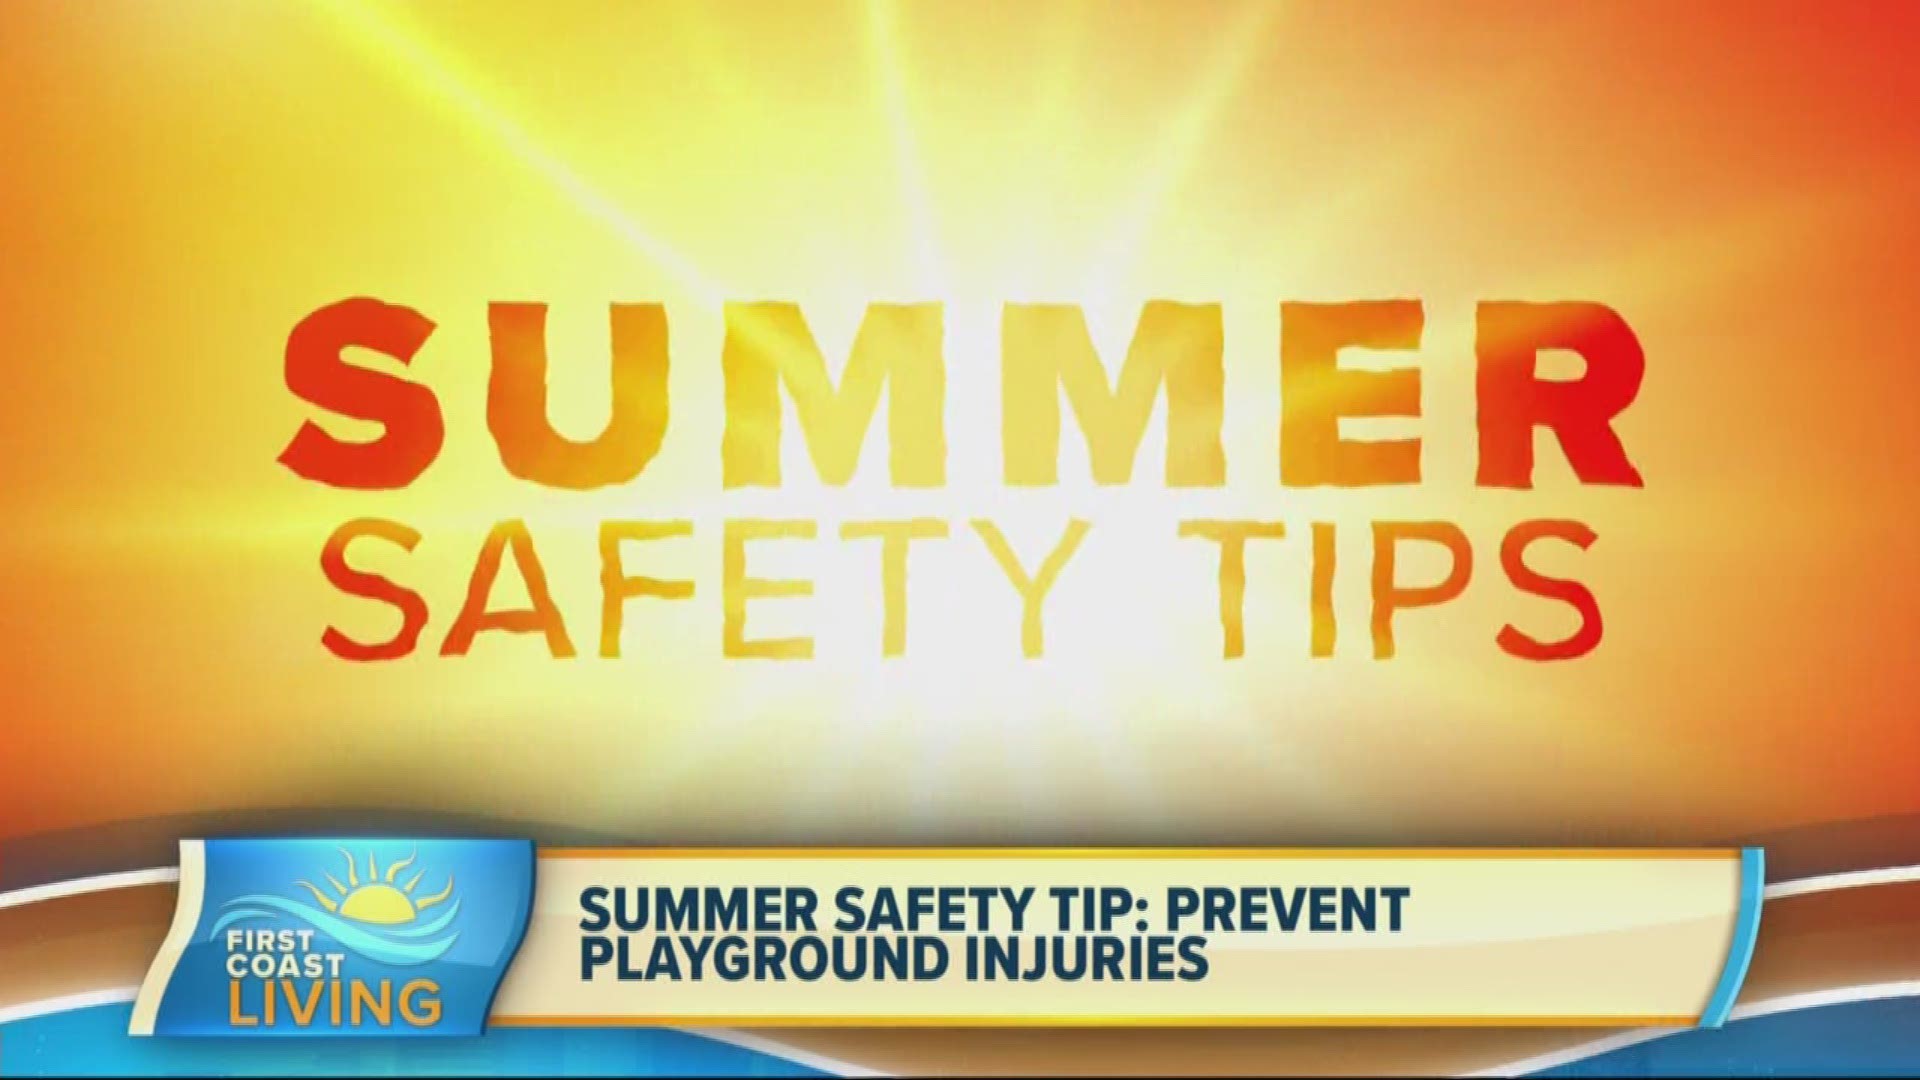 Be sure to share these summer safety tips with your children as they head back to school!